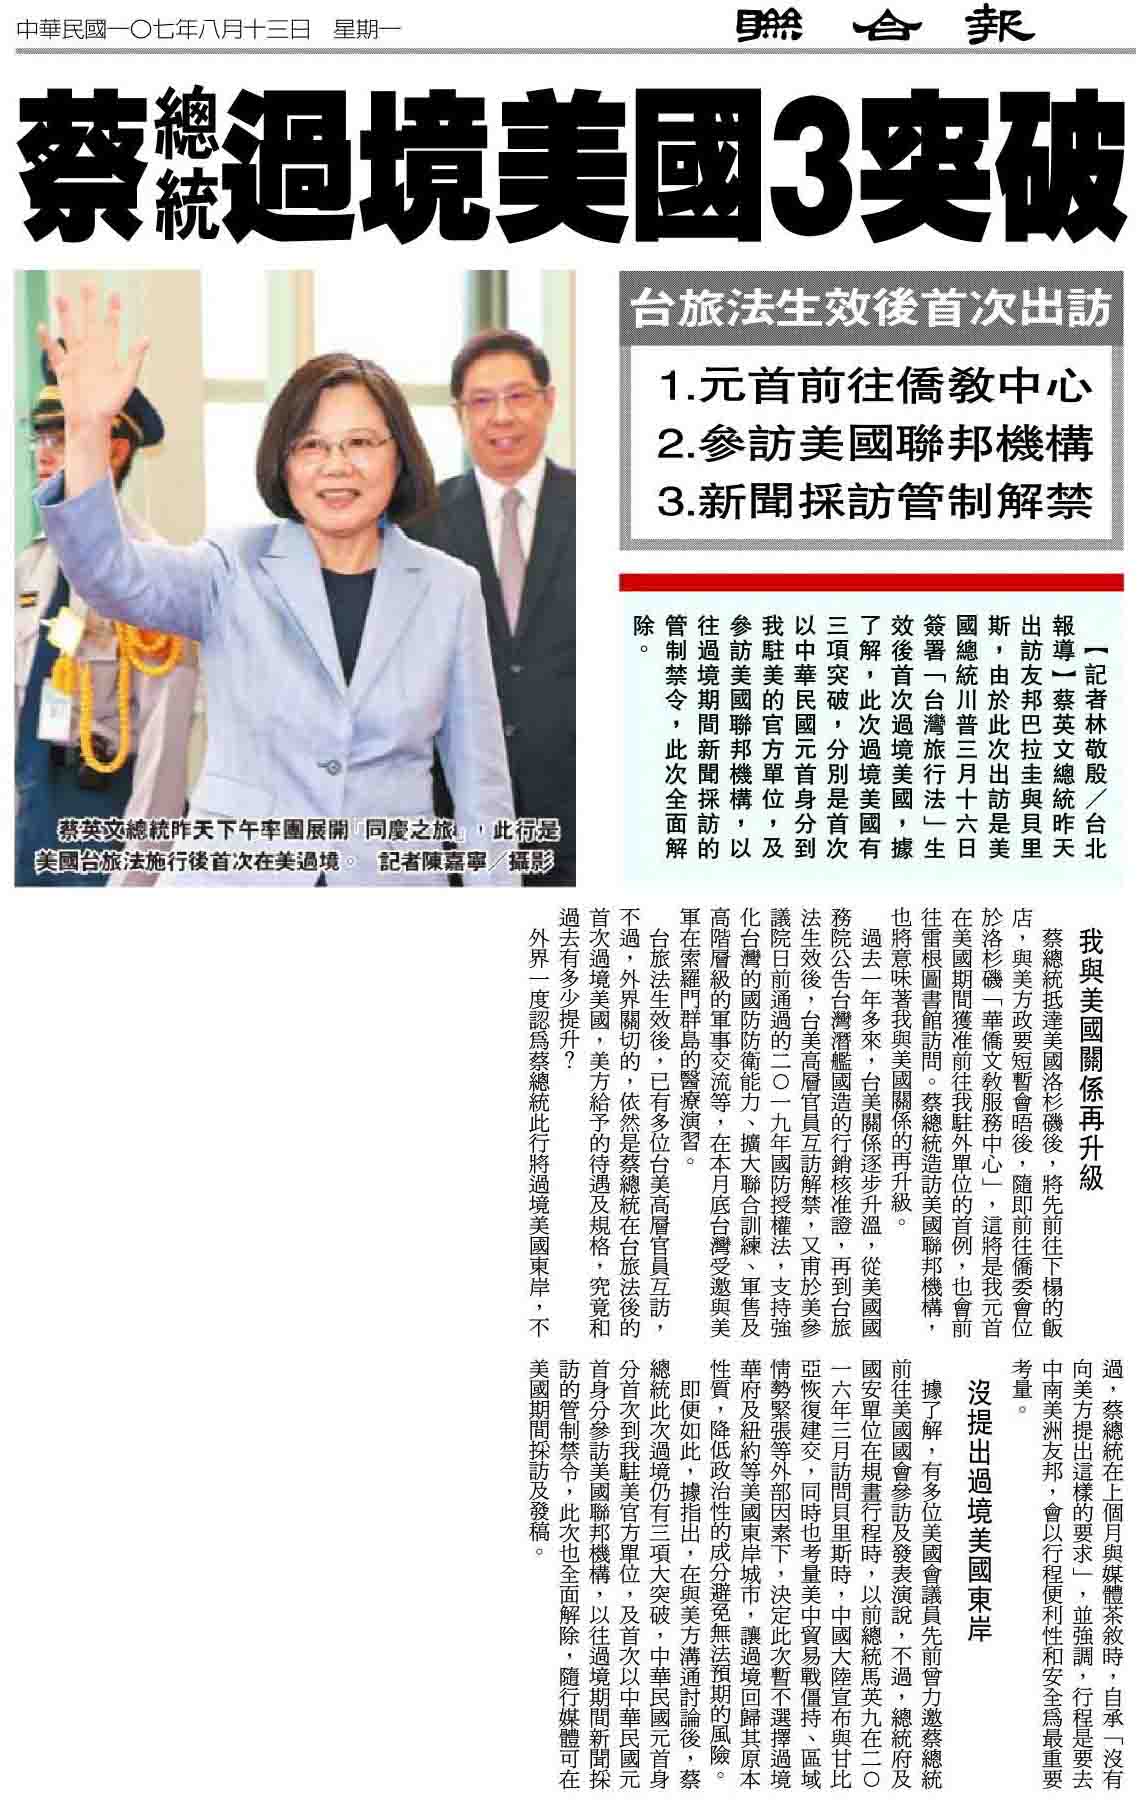 President Tsai achieves three breakthroughs during stopover in US